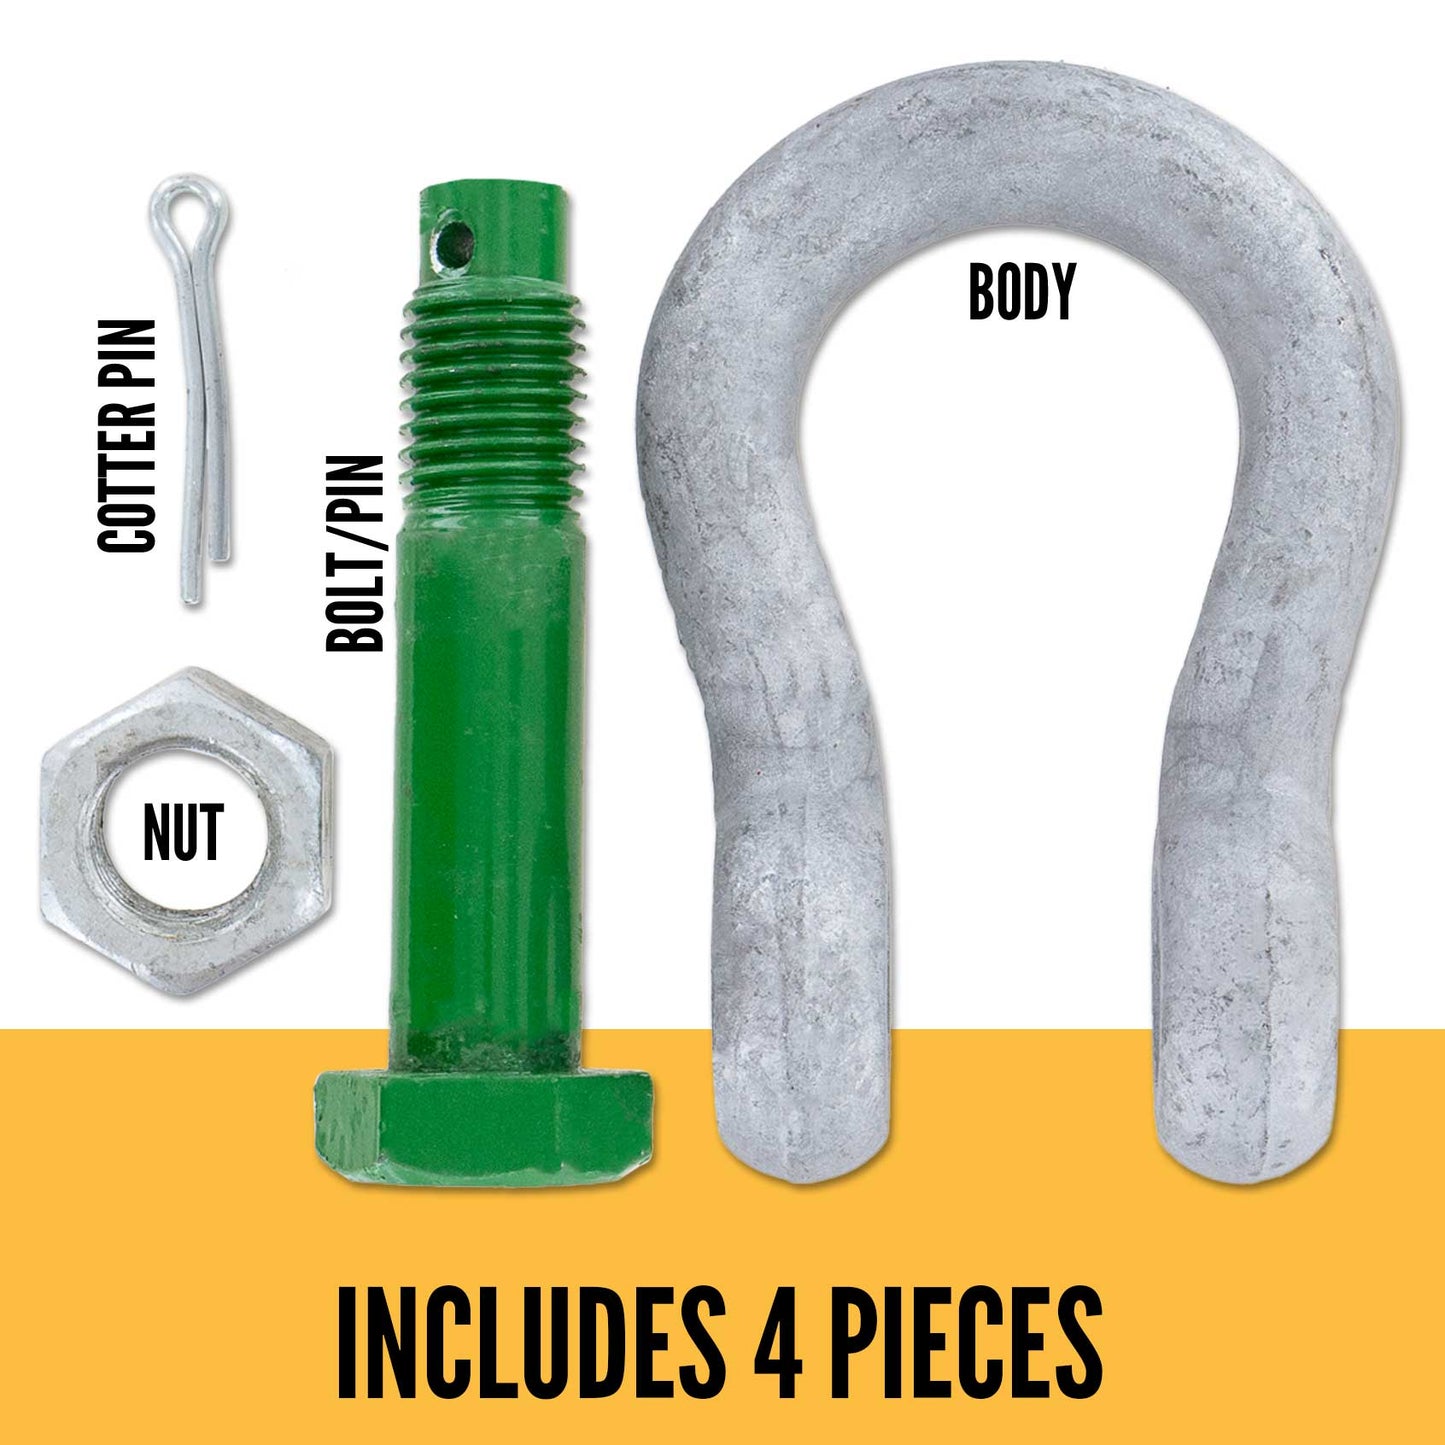 1-1/8" Van Beest Green Pin® Bolt Type Anchor Shackle | G-4163 - 9.5 Ton parts of a shackle